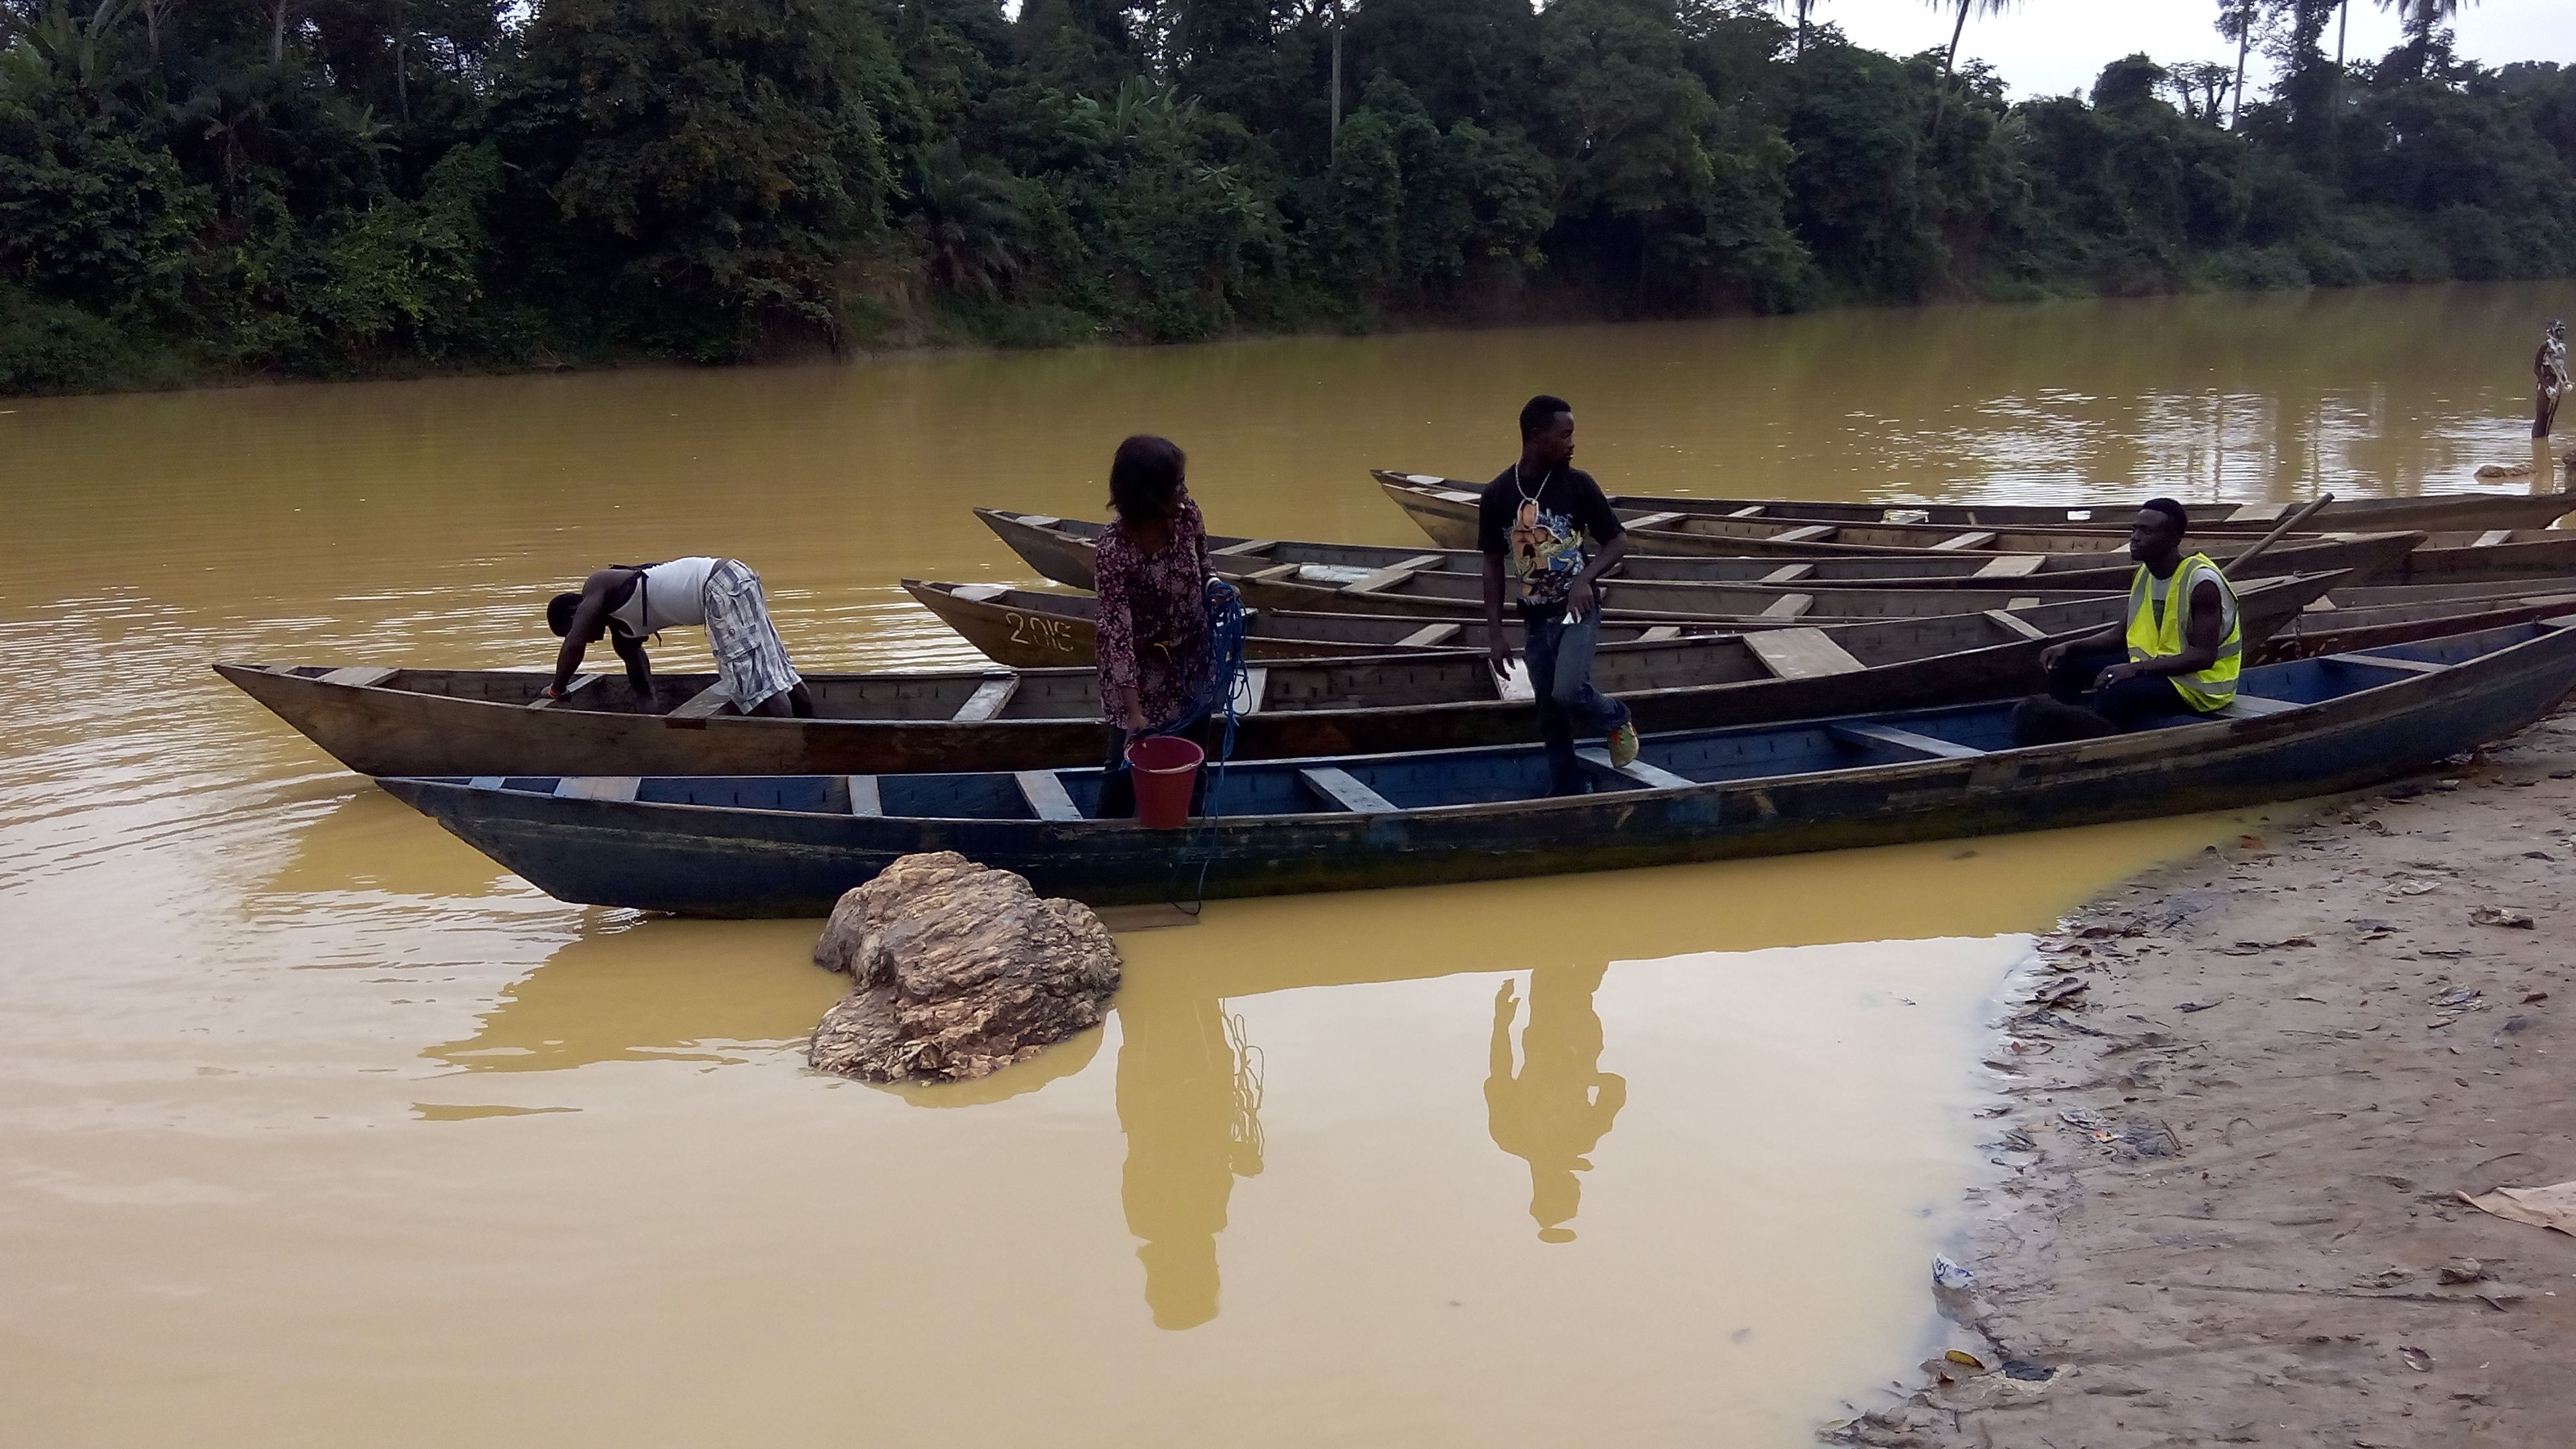 Adwoba Edjah of the Ghana Atomic Energy Commission and her team collect water samples to check for contaminants from illegal mining. She will test samples at a research reactor in Accra, Ghana's capital. Image courtesy of Adwoba Edjah. Ghana, 2017.